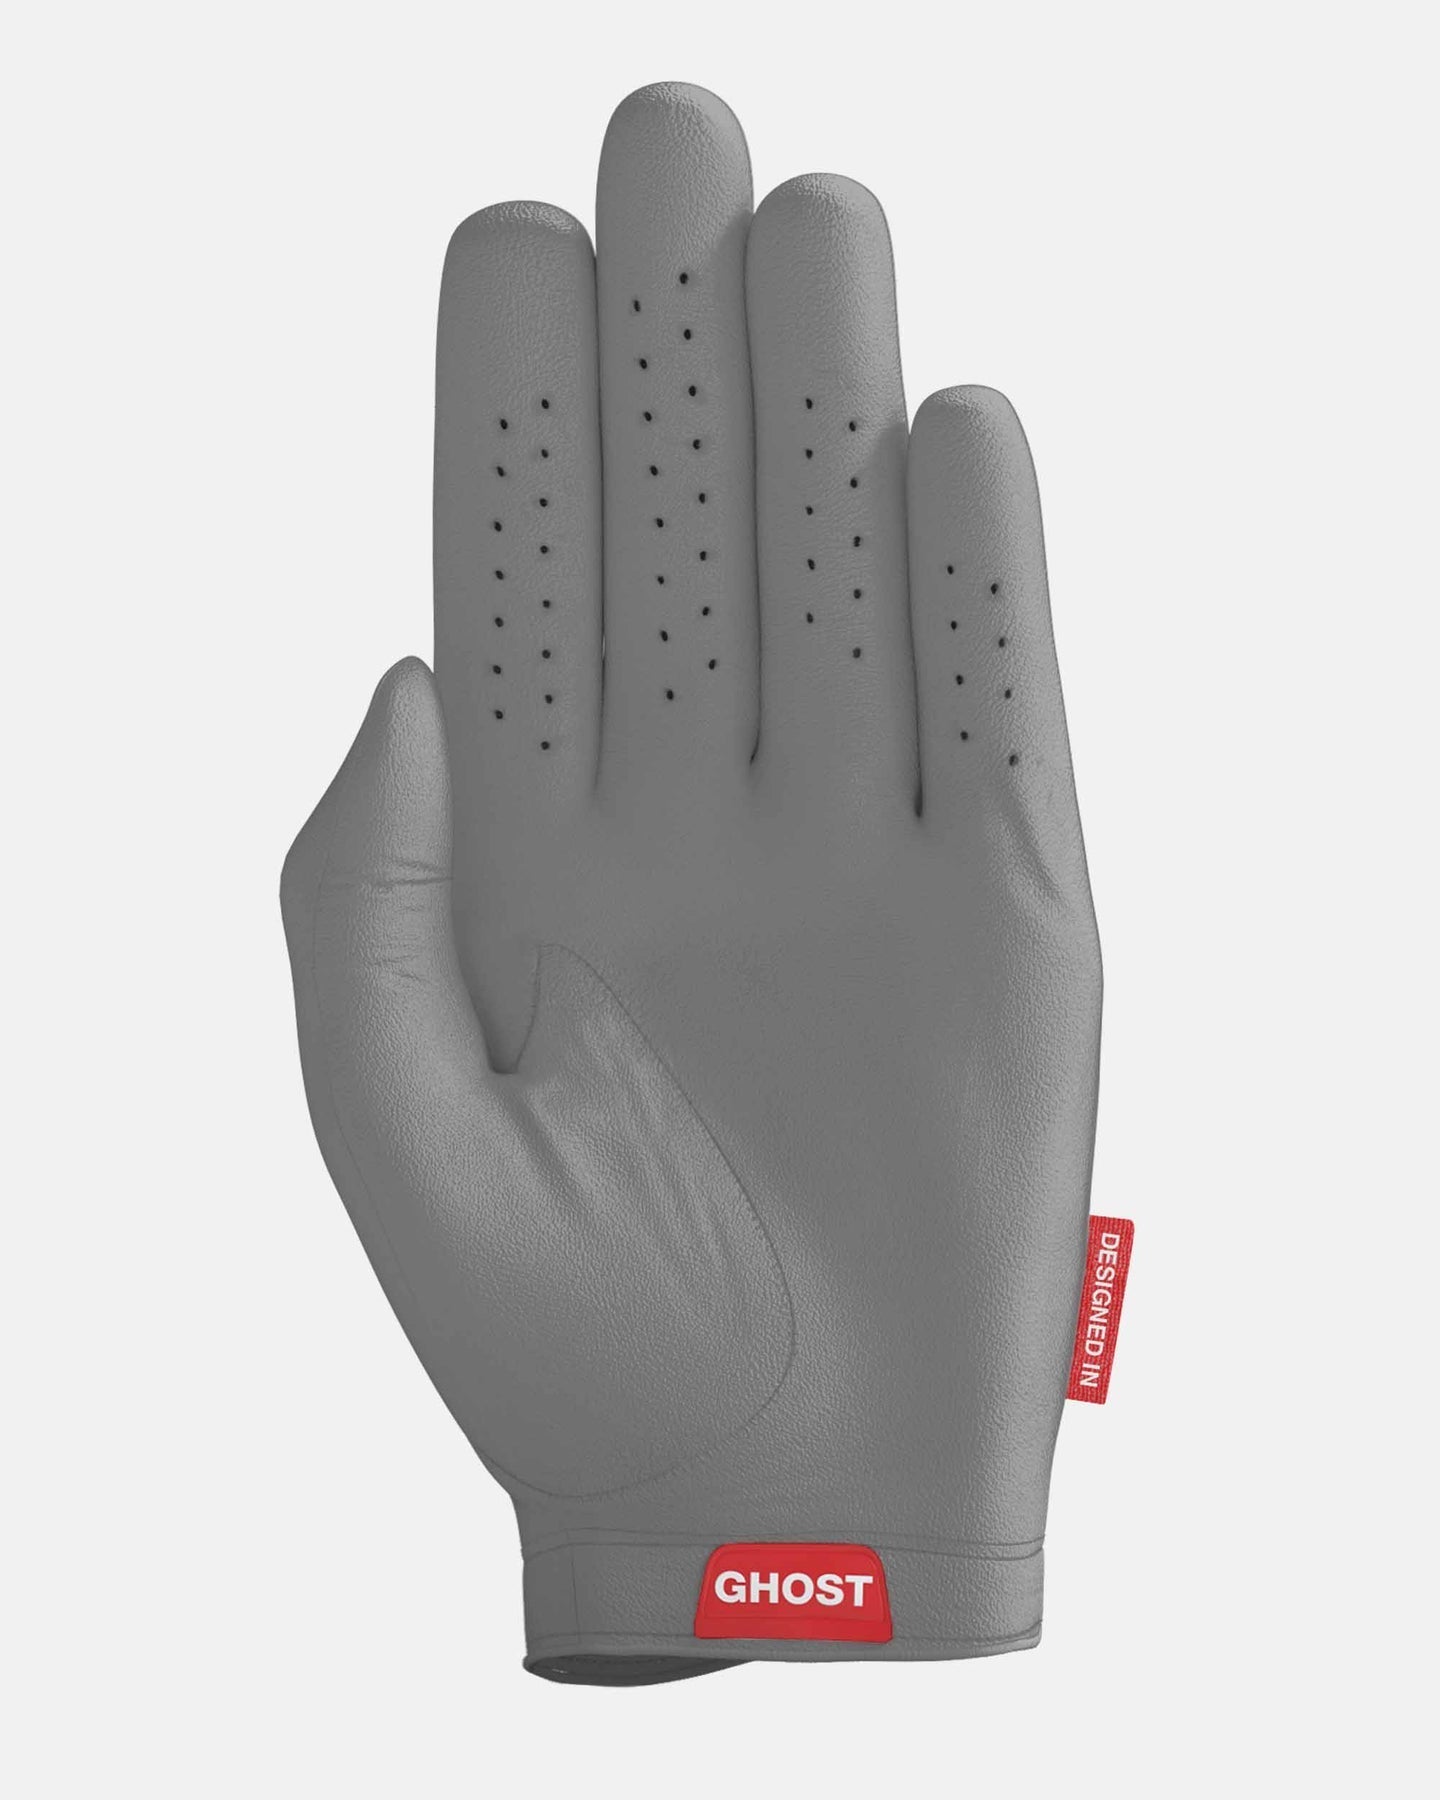 Ghost Right Hand Glove, Snow Leopard